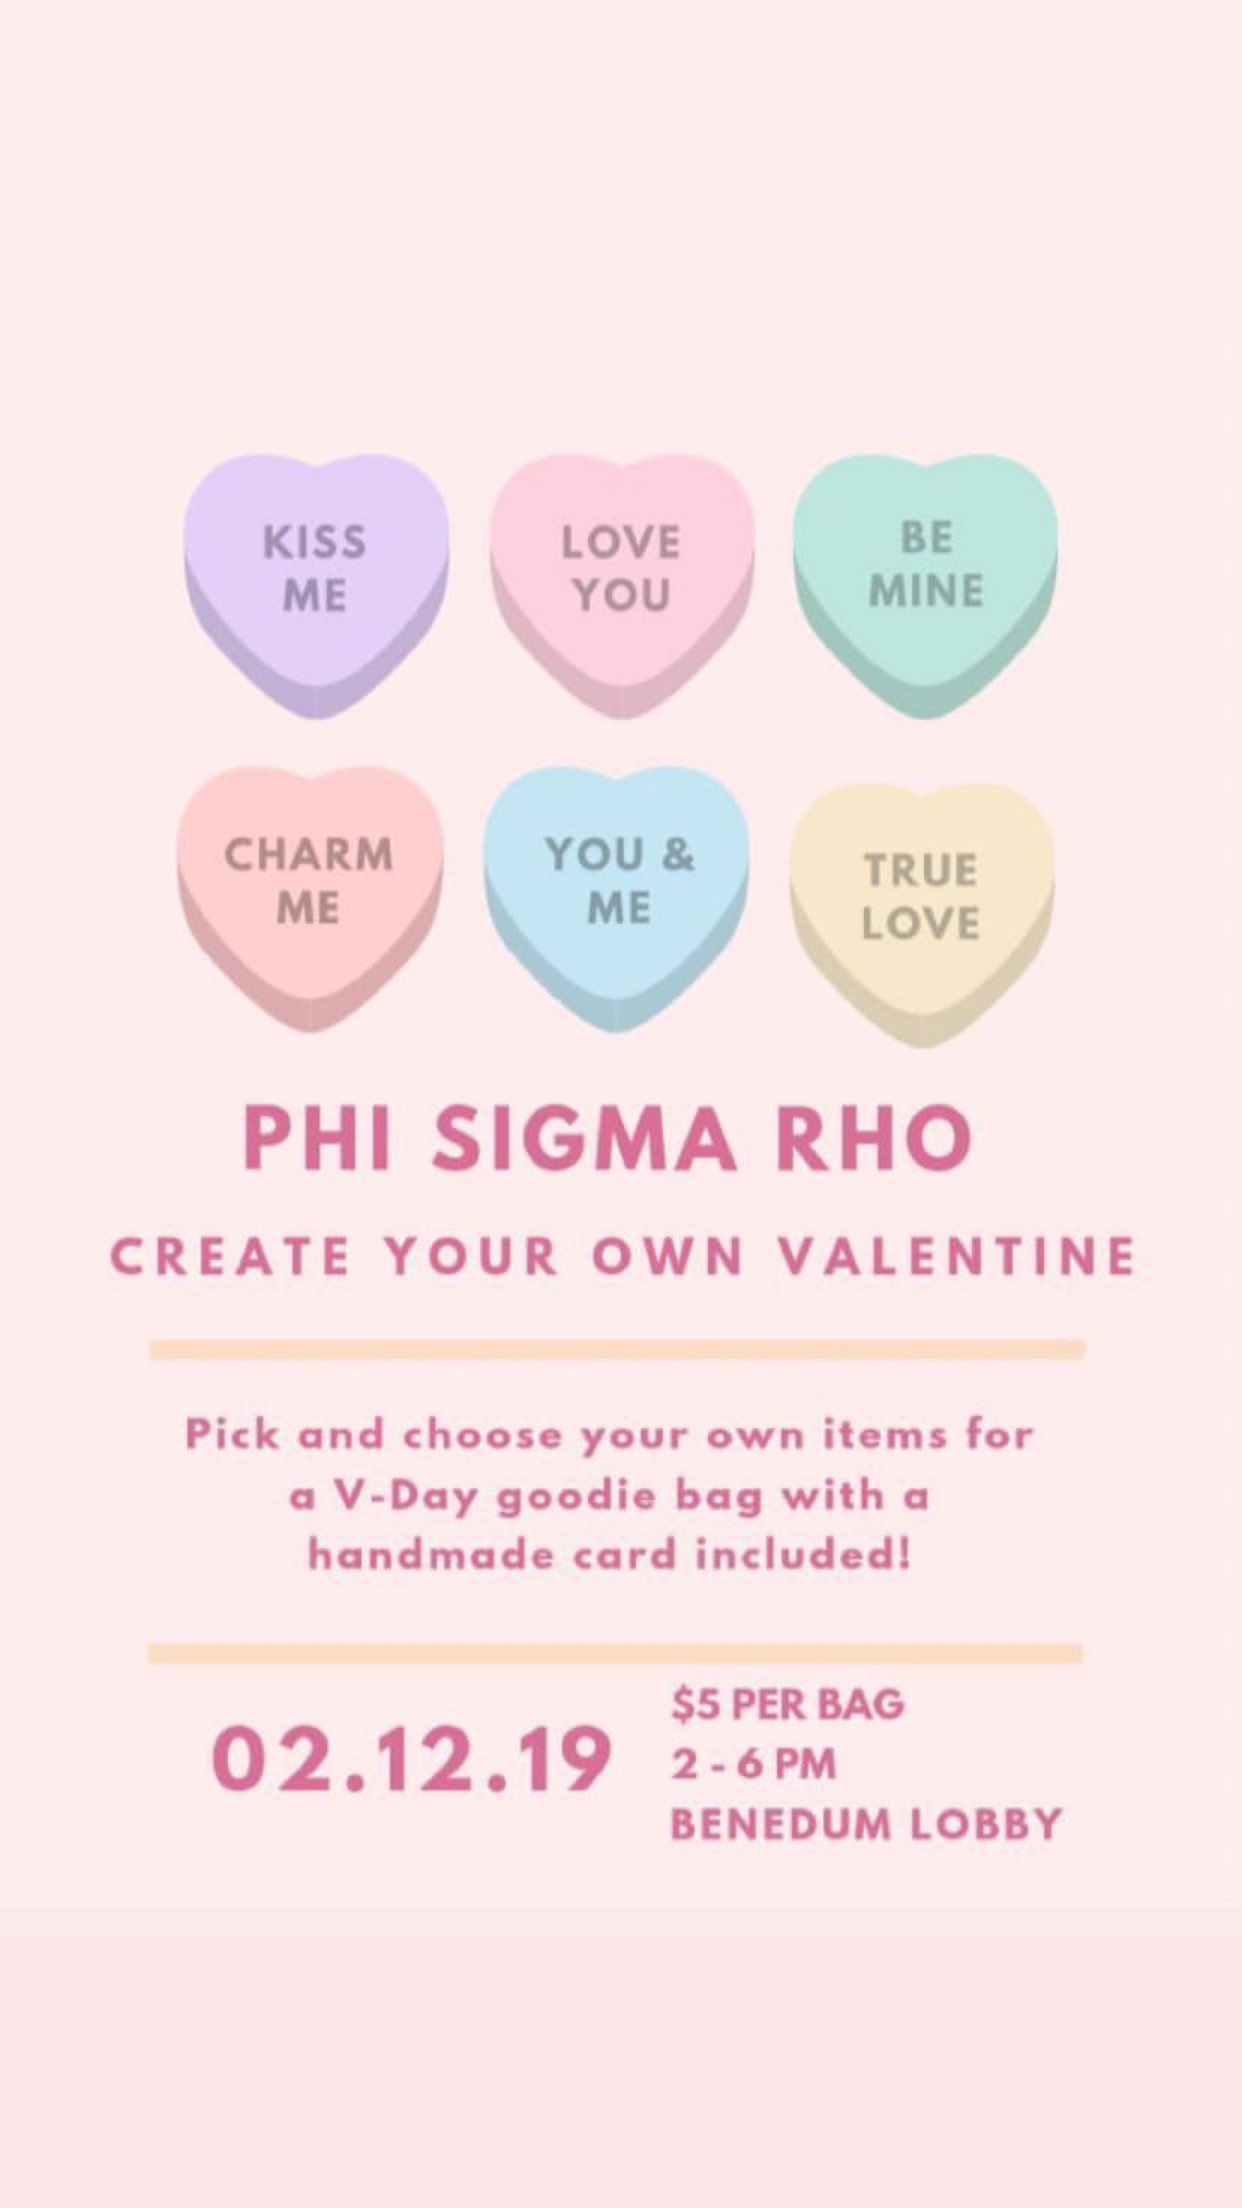 Valentines Day Fundraising Ideas
 Valentine’s Day fundraiser by Phi Sigma Rho 💘